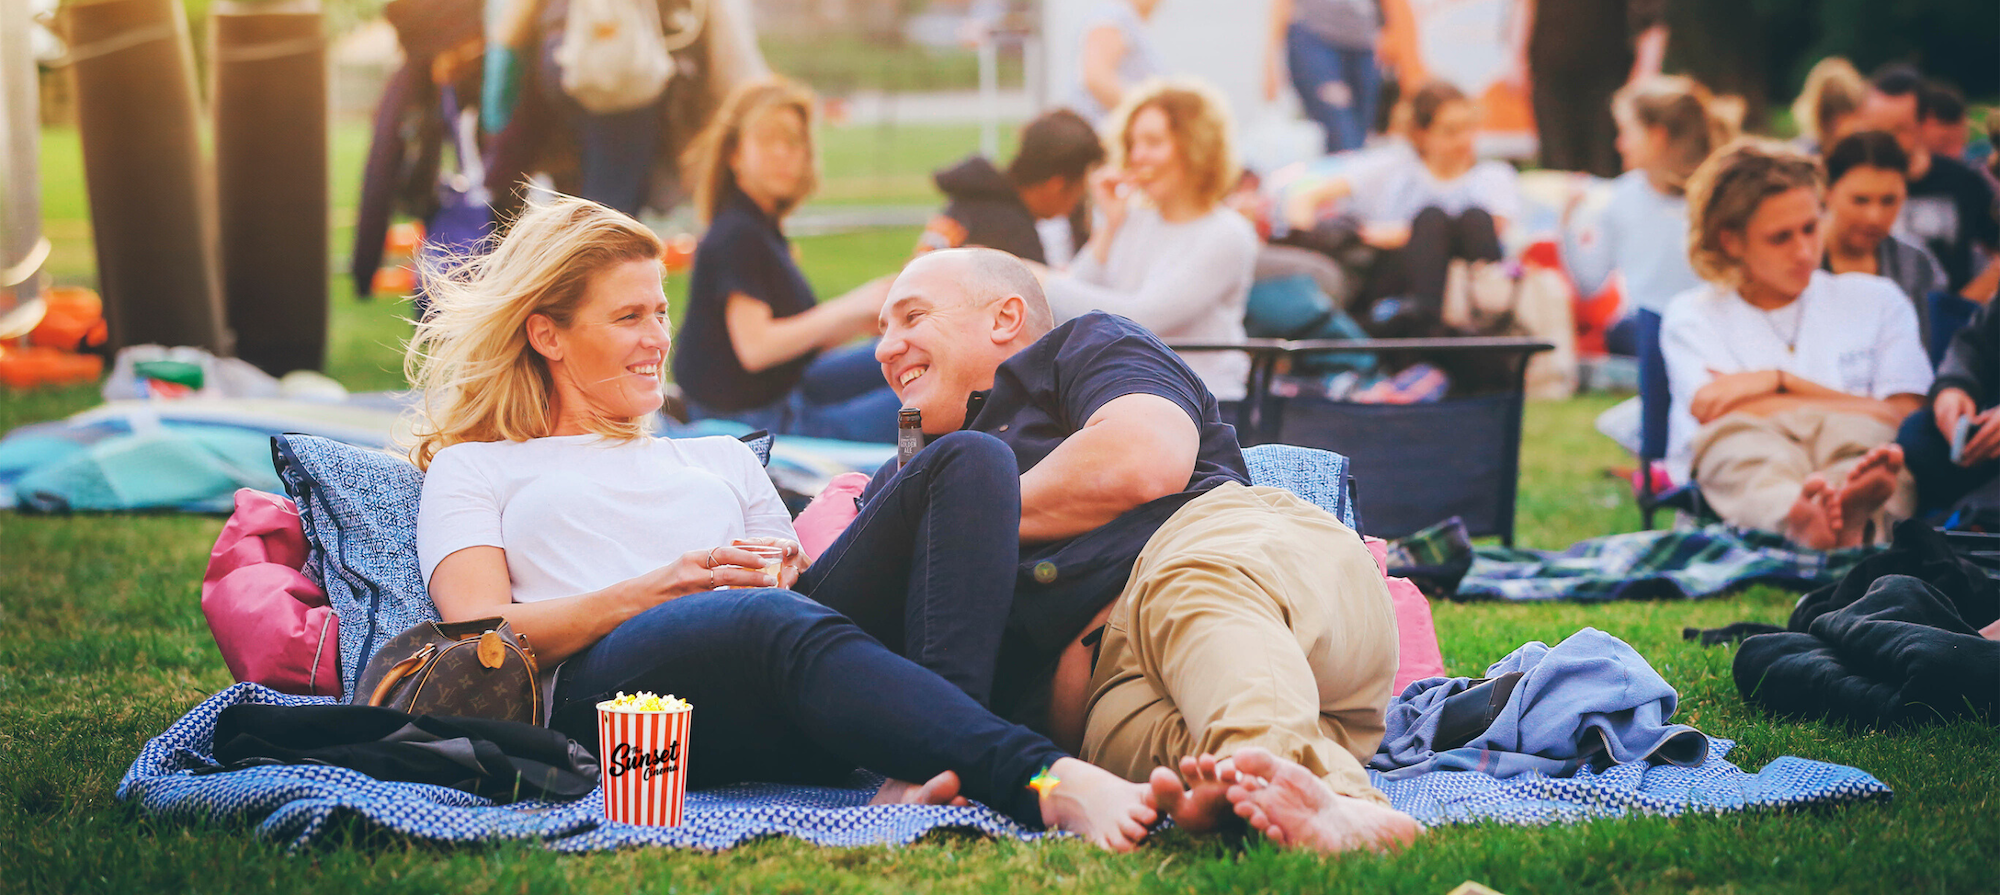 Couple laying down on grass for an outdoor movie